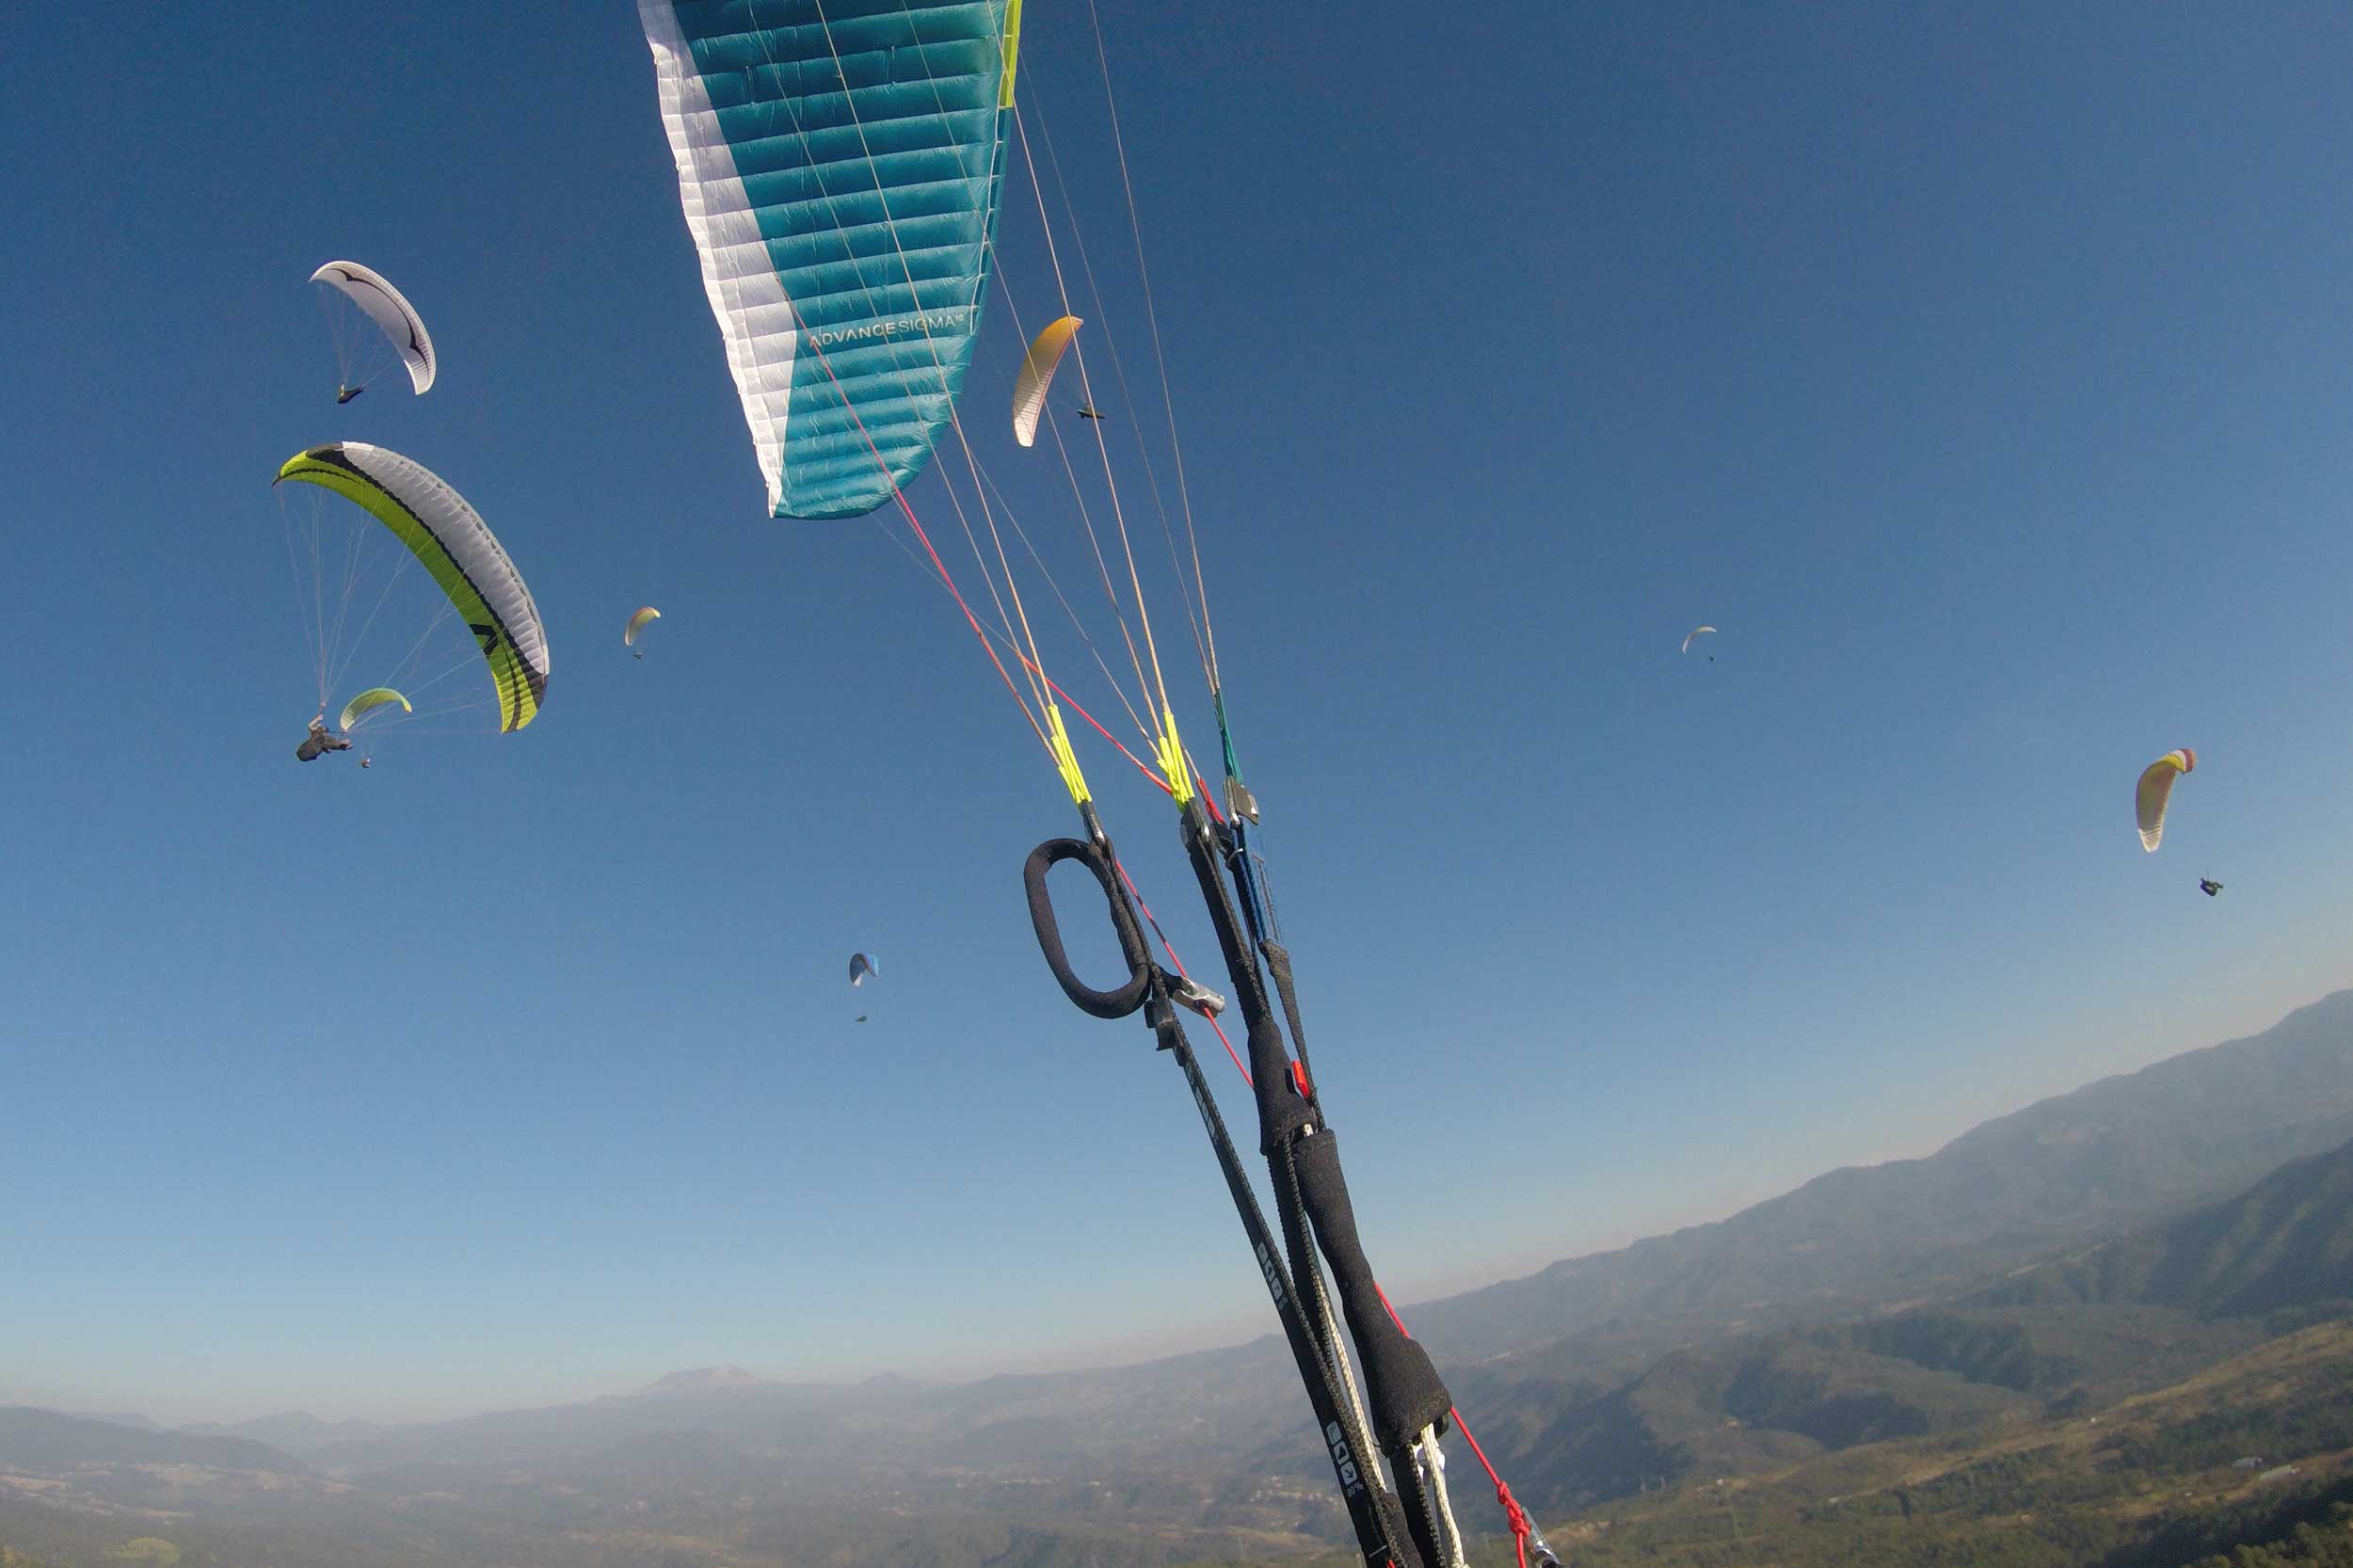 Paraglide-New-England-Trips-Valle-de-Bravo-Mexico-Gallery-Tim-FPV-House-Thermal.jpg